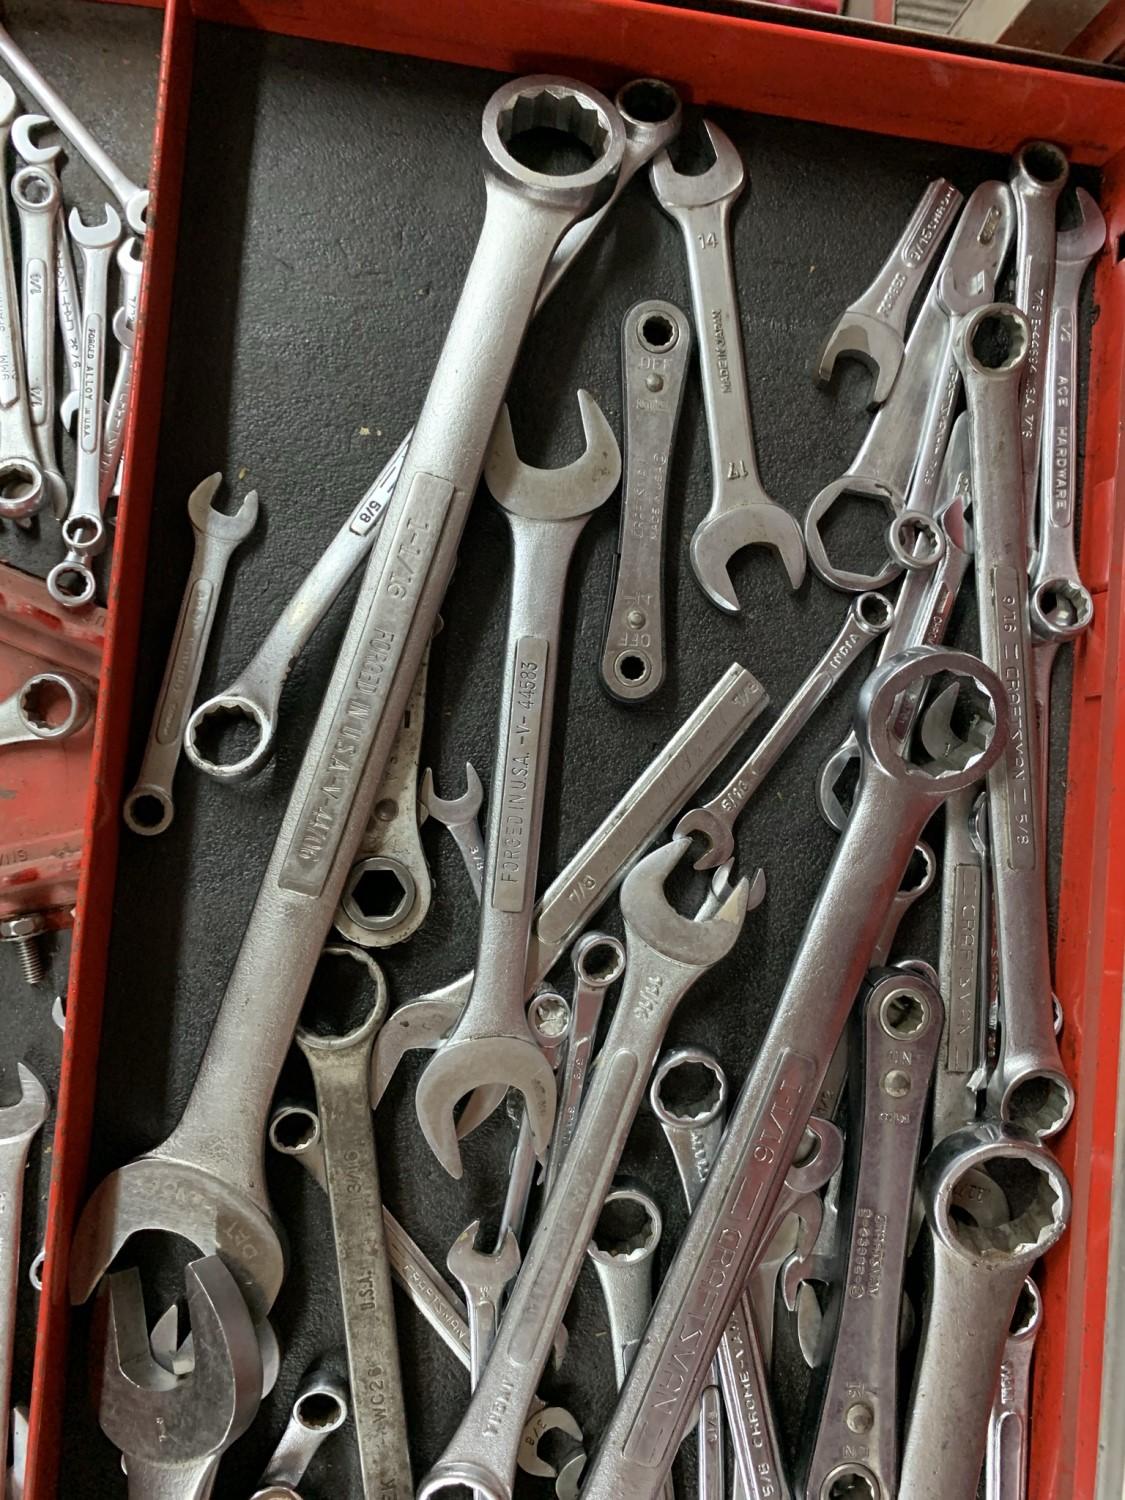 Contents of 3 Drawers Including- Tin Snips, Wrenches, Gear Wrenches & More